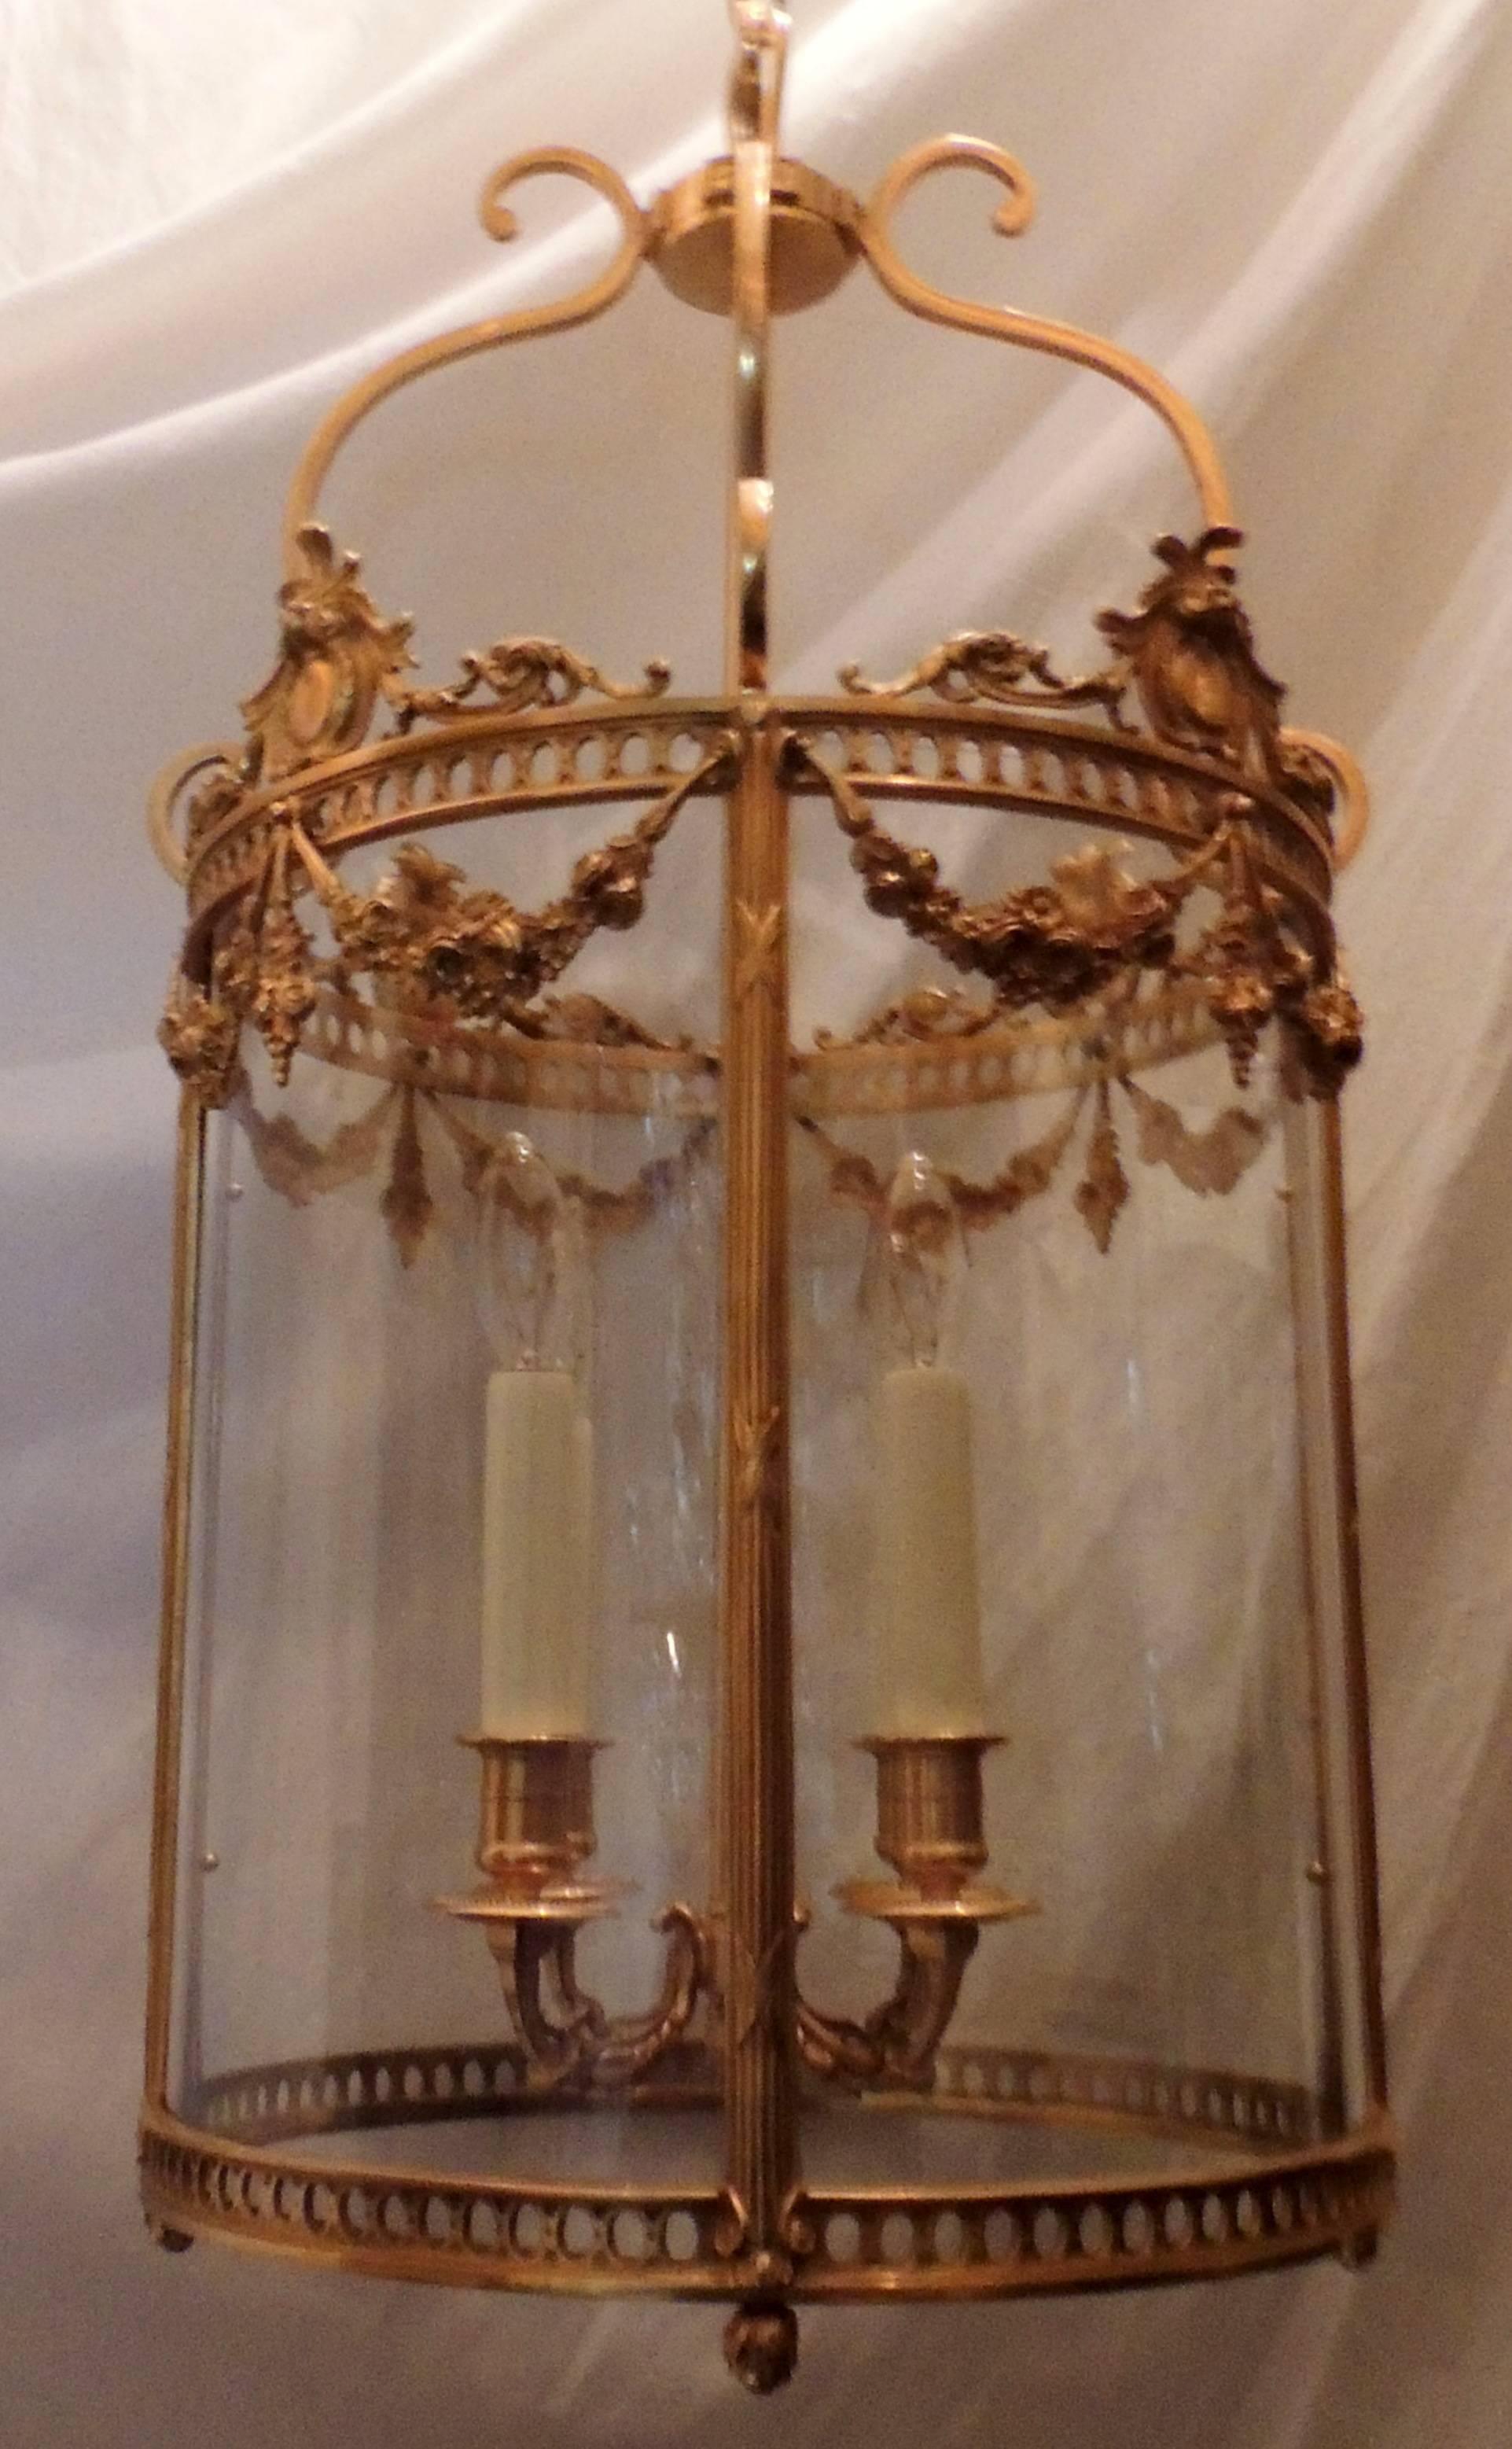 A wonderful French ormolu-mounted doré gilt bronze floral swag and crest top four-light rounded glass lantern chandelier fixture.